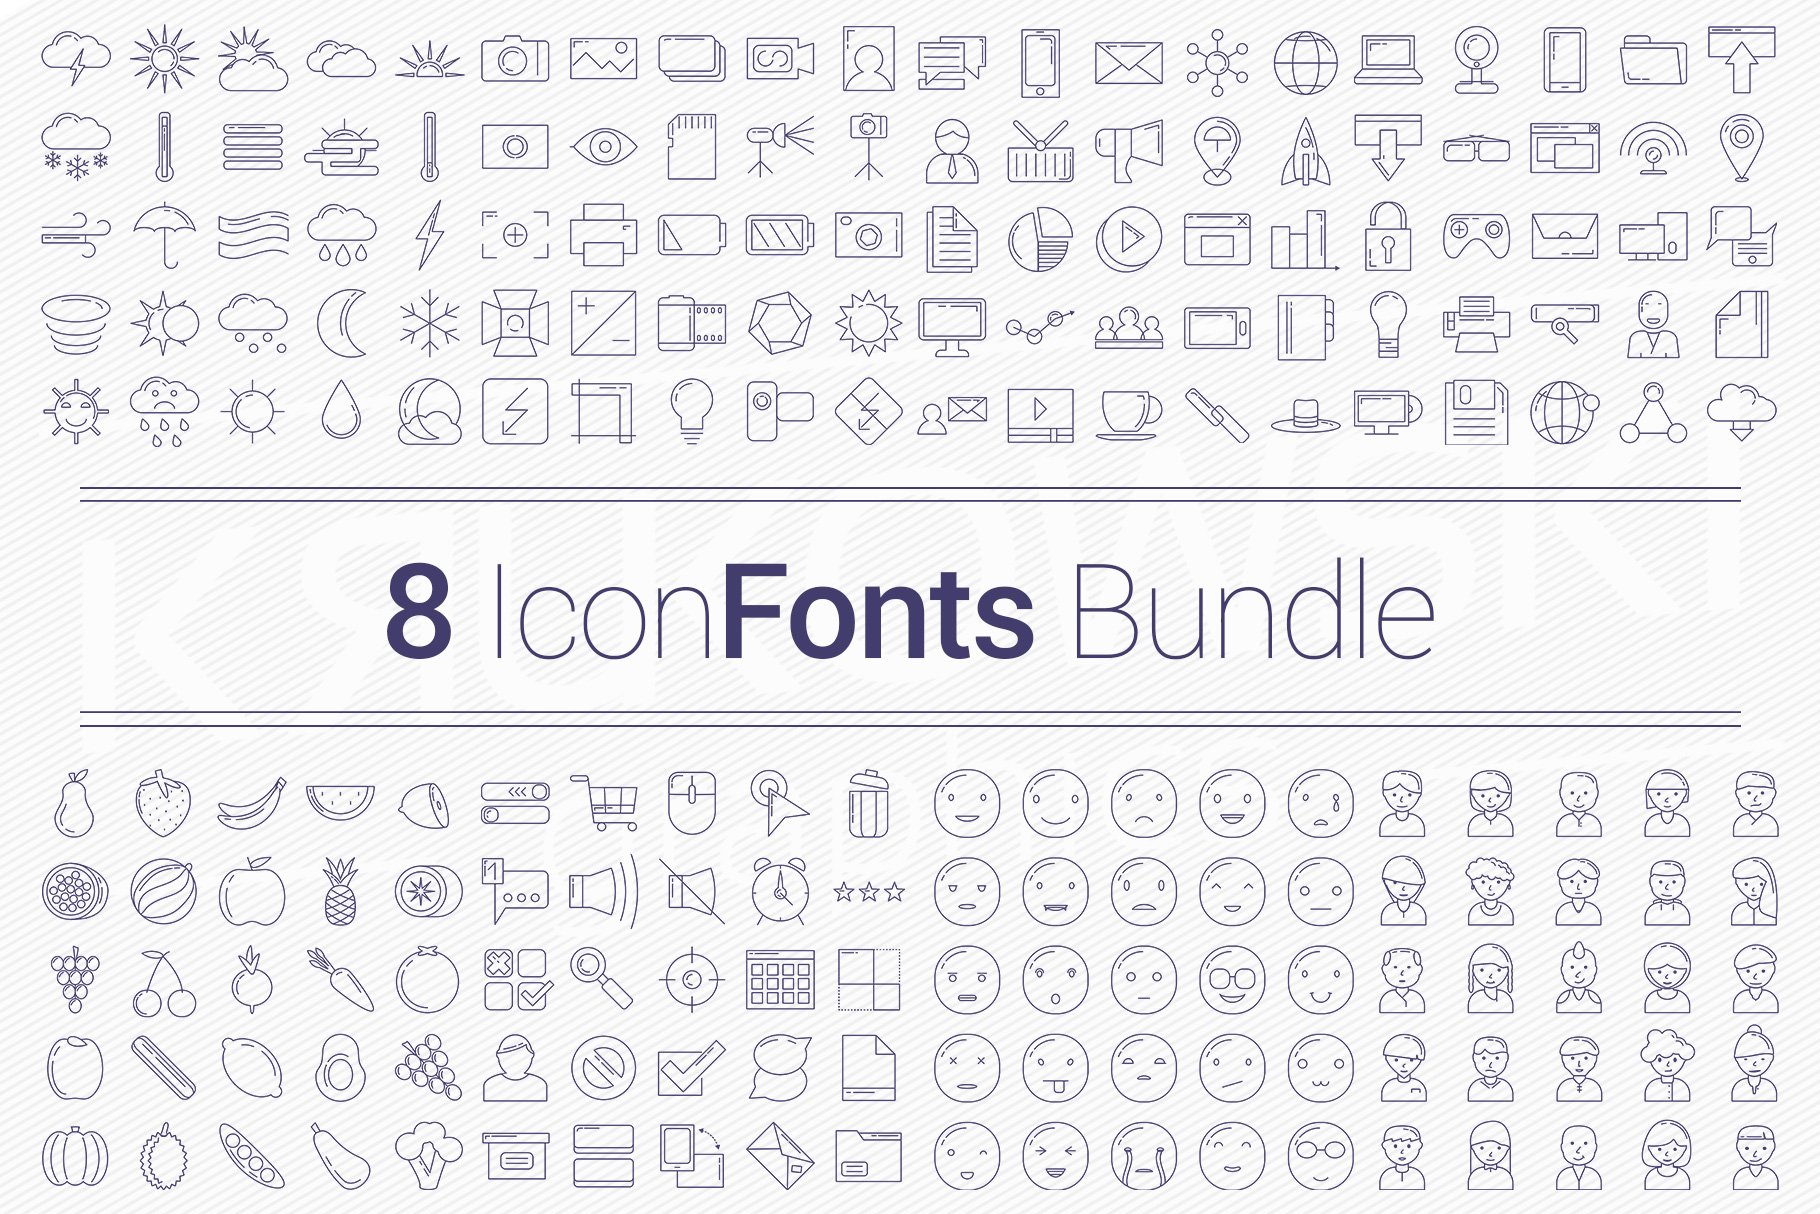 200 Icons in 8 Fonts - Bundle cover image.